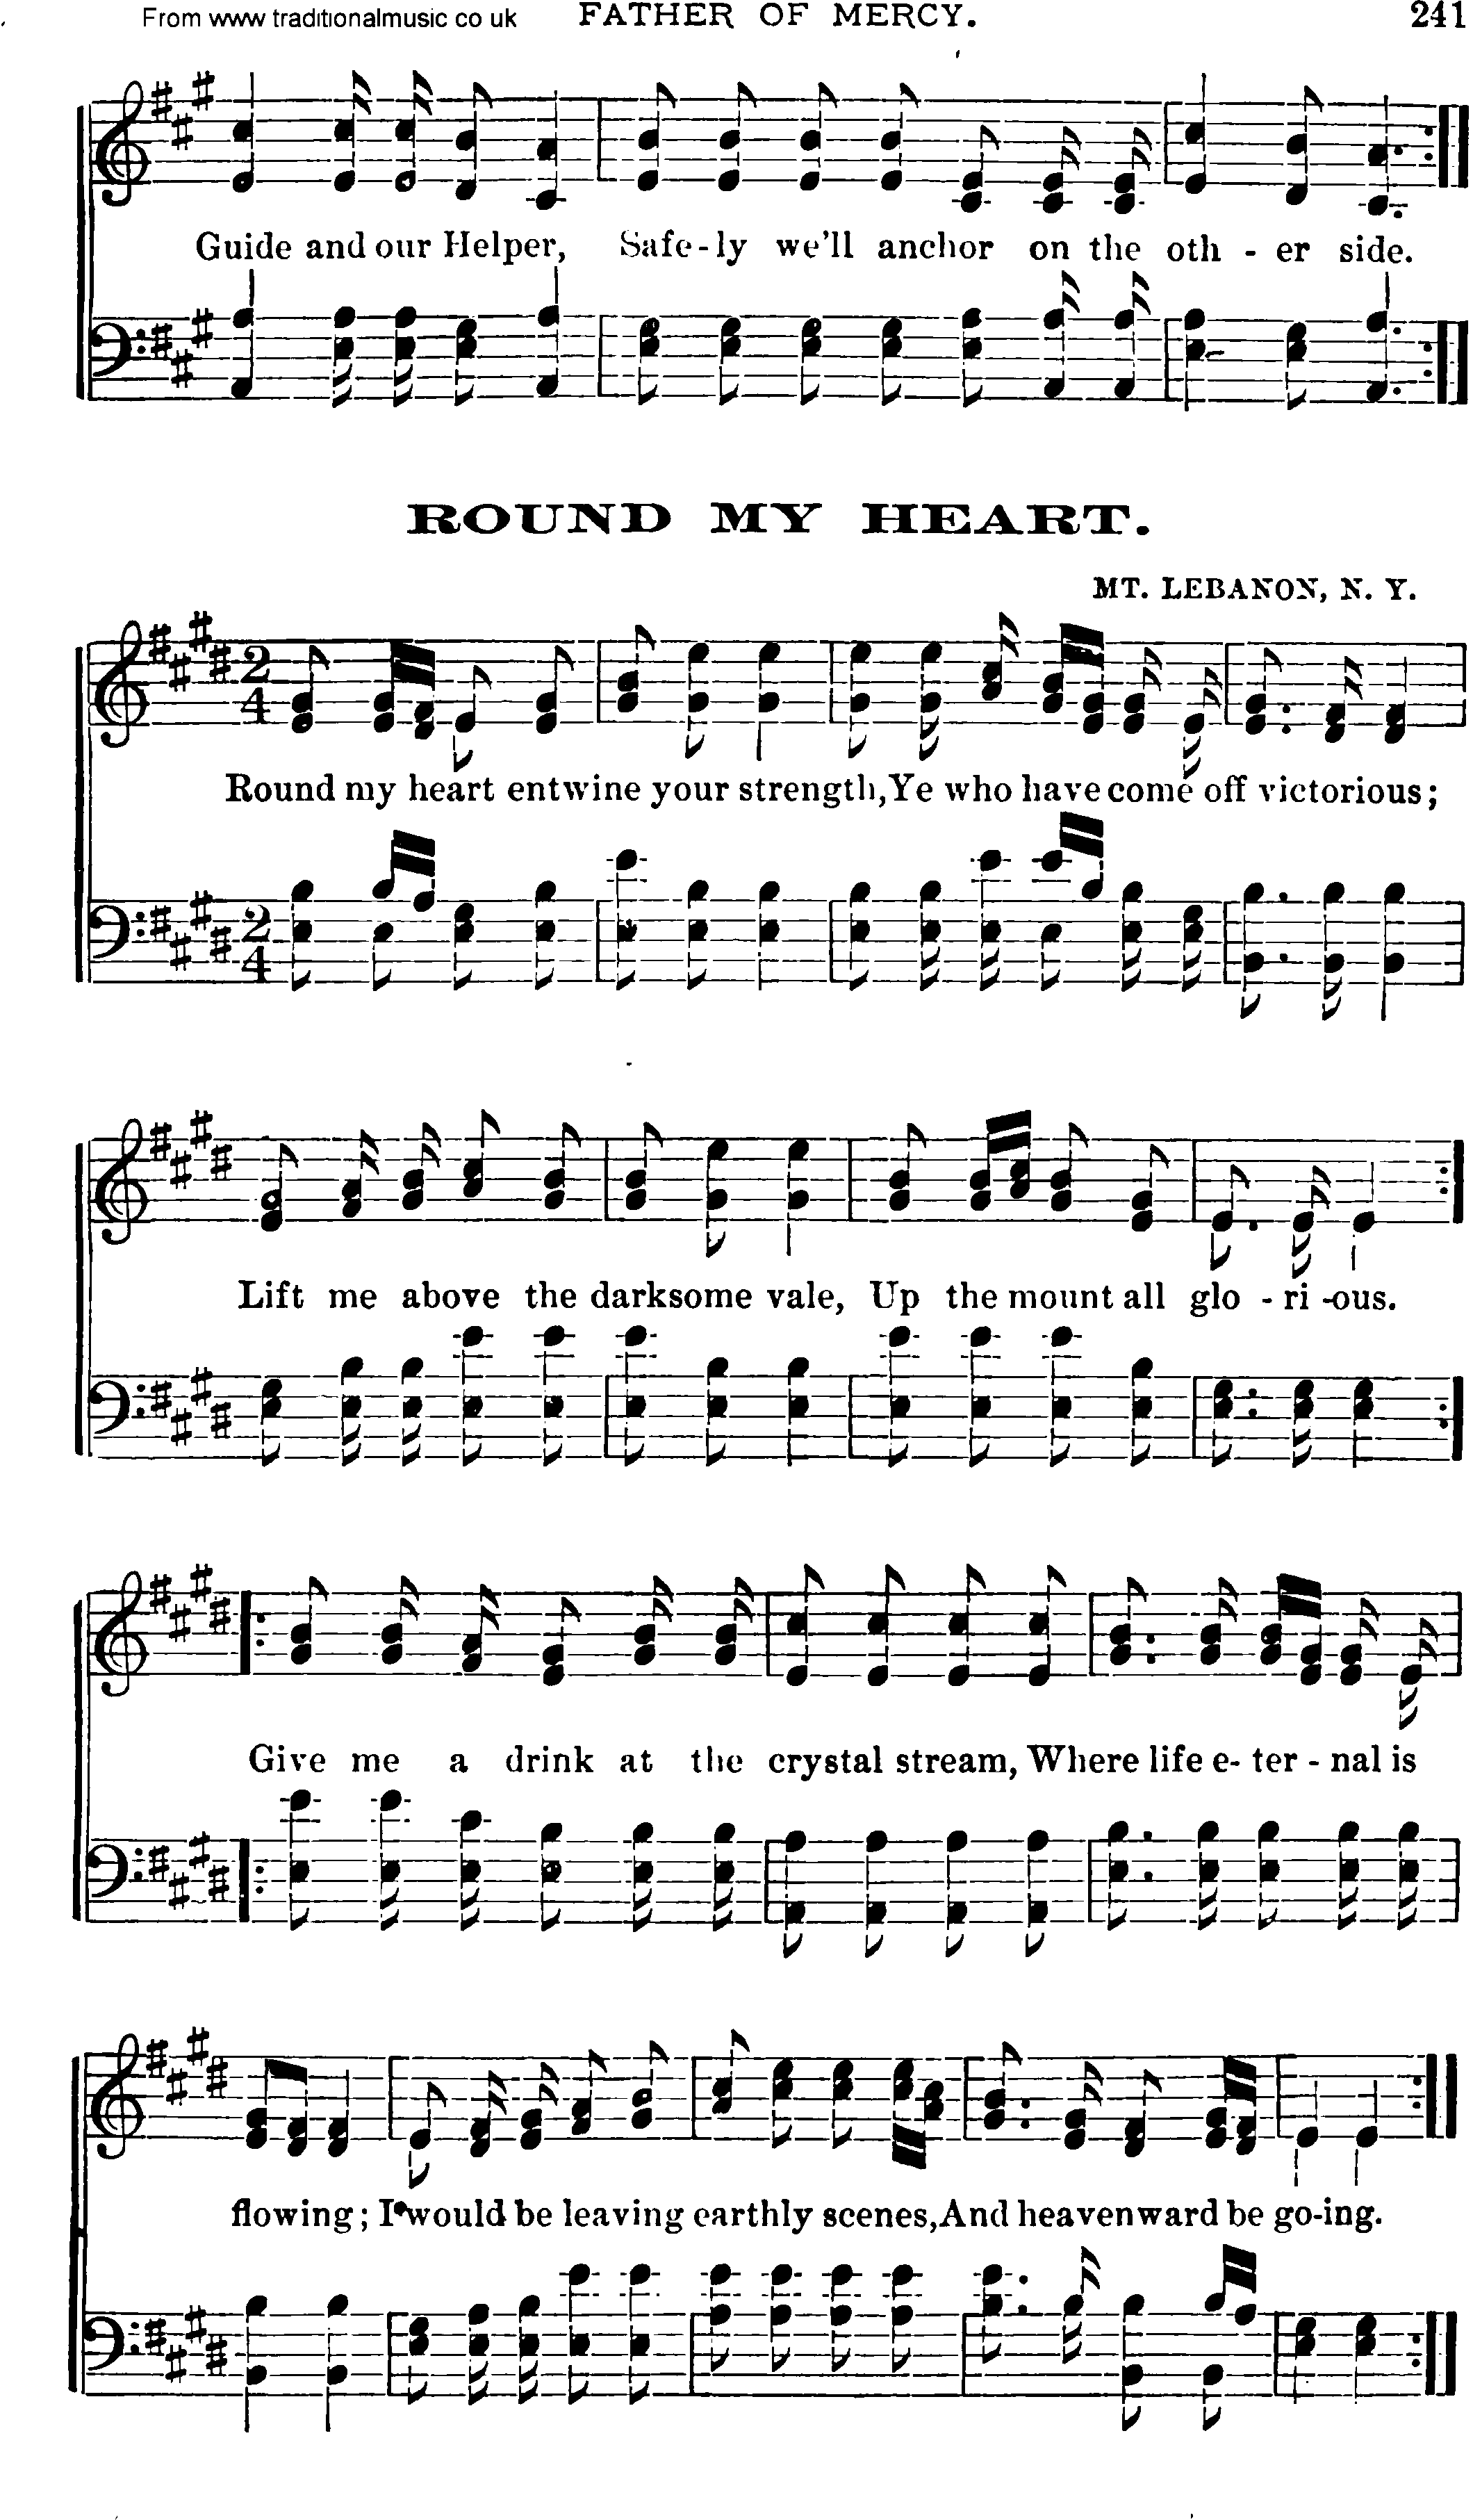 Shaker Music collection, Hymn: Round My Heart, sheetmusic and PDF